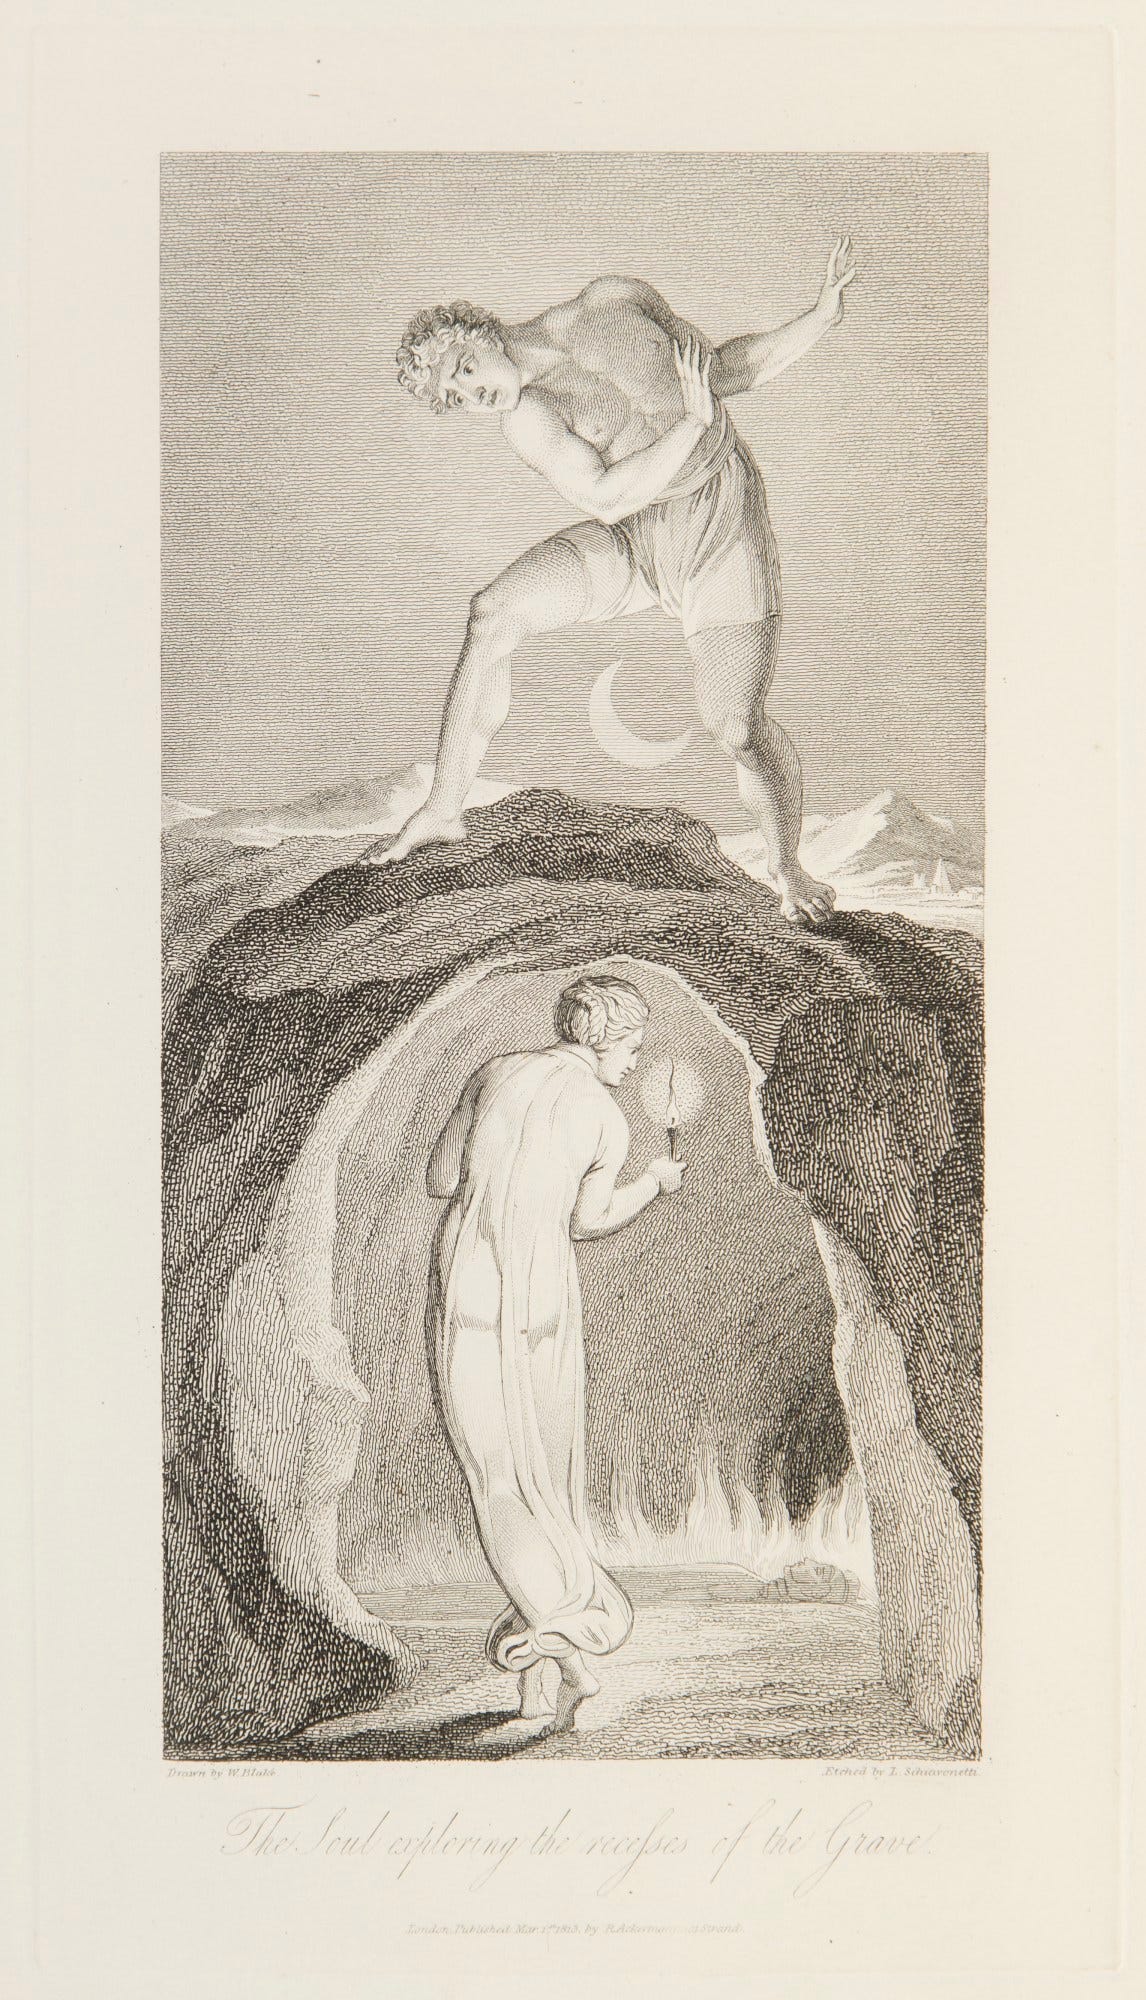 William Blake, The Soul exploring the recesses of the Grave